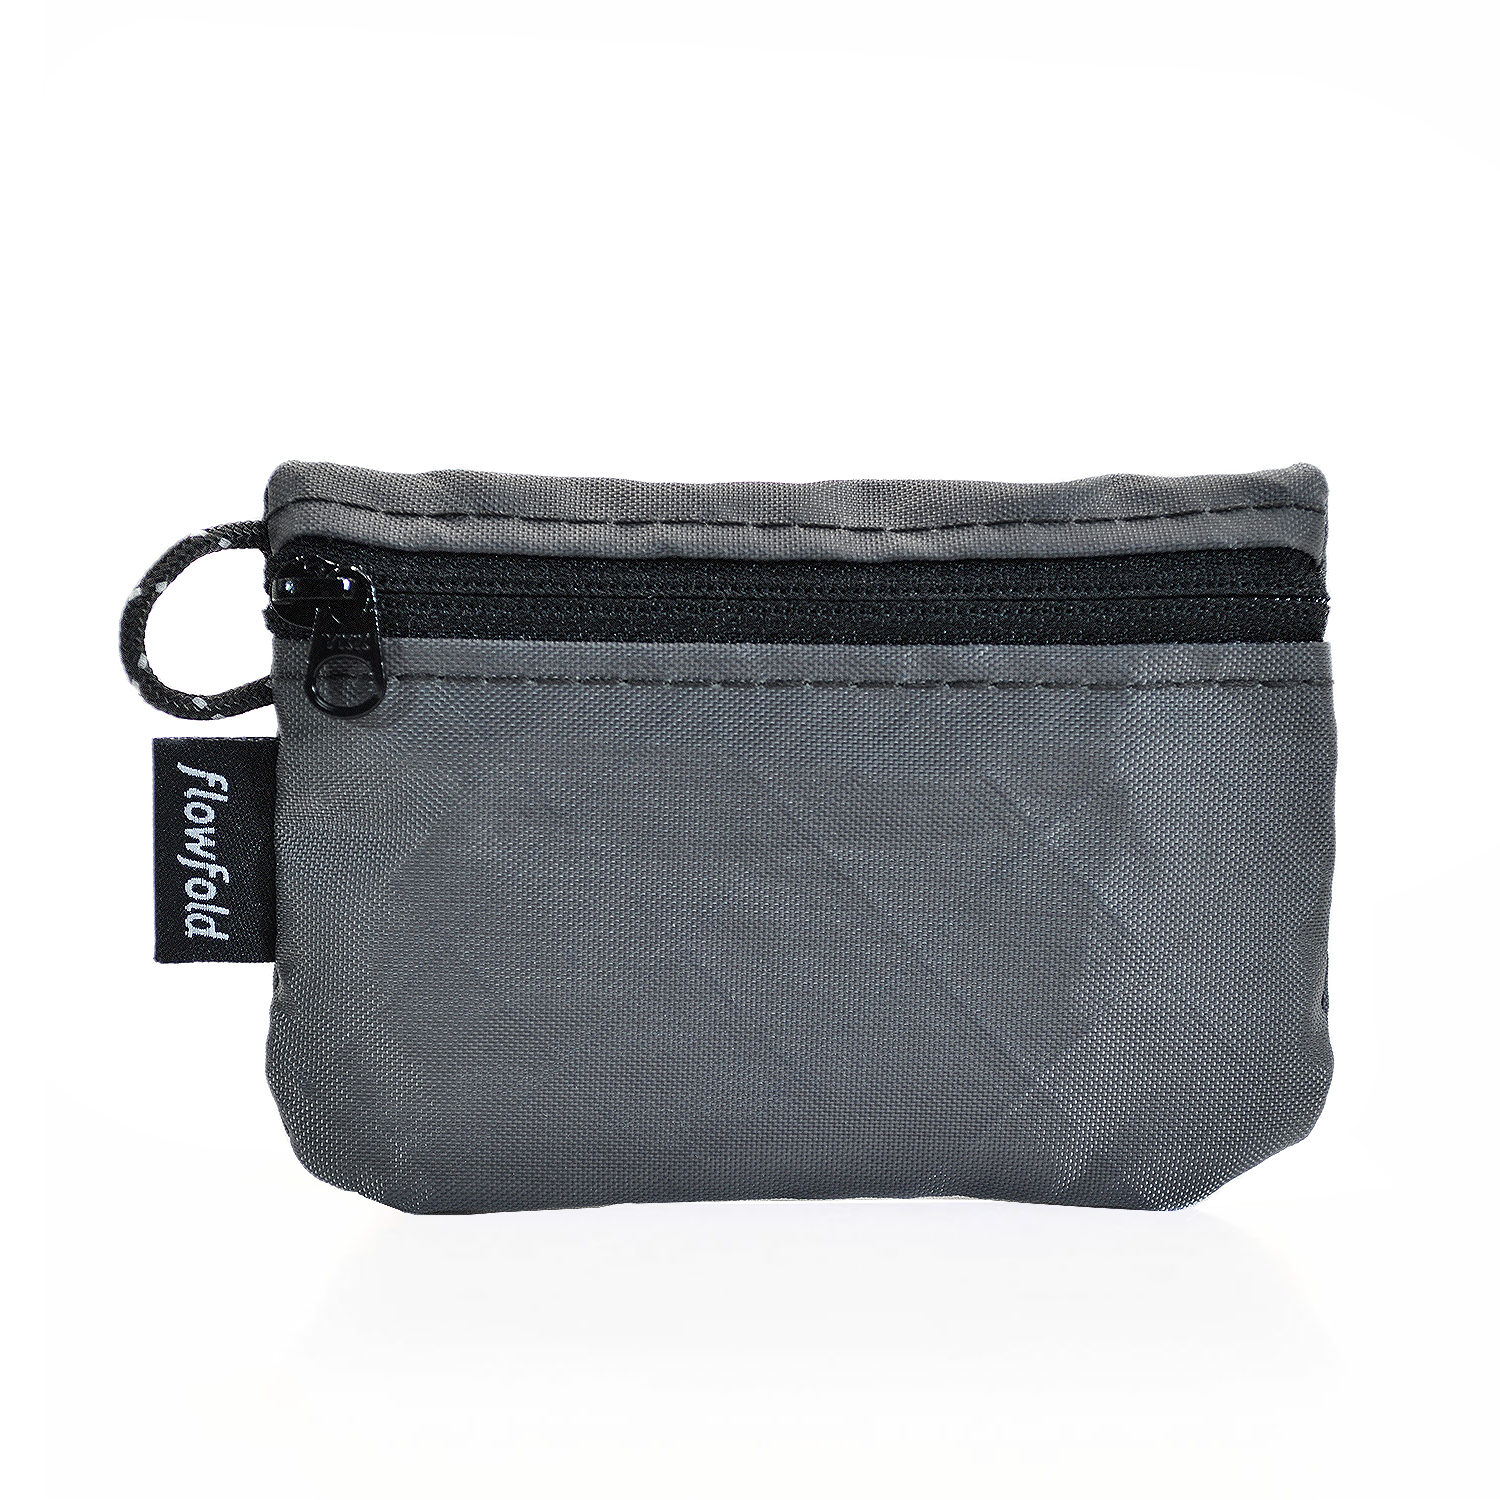 Flowfold Wolf Grey Essentialist Coin Pouch Wallet For Cash, Cards, and Airpods Made in USA, Maine by Flowfold